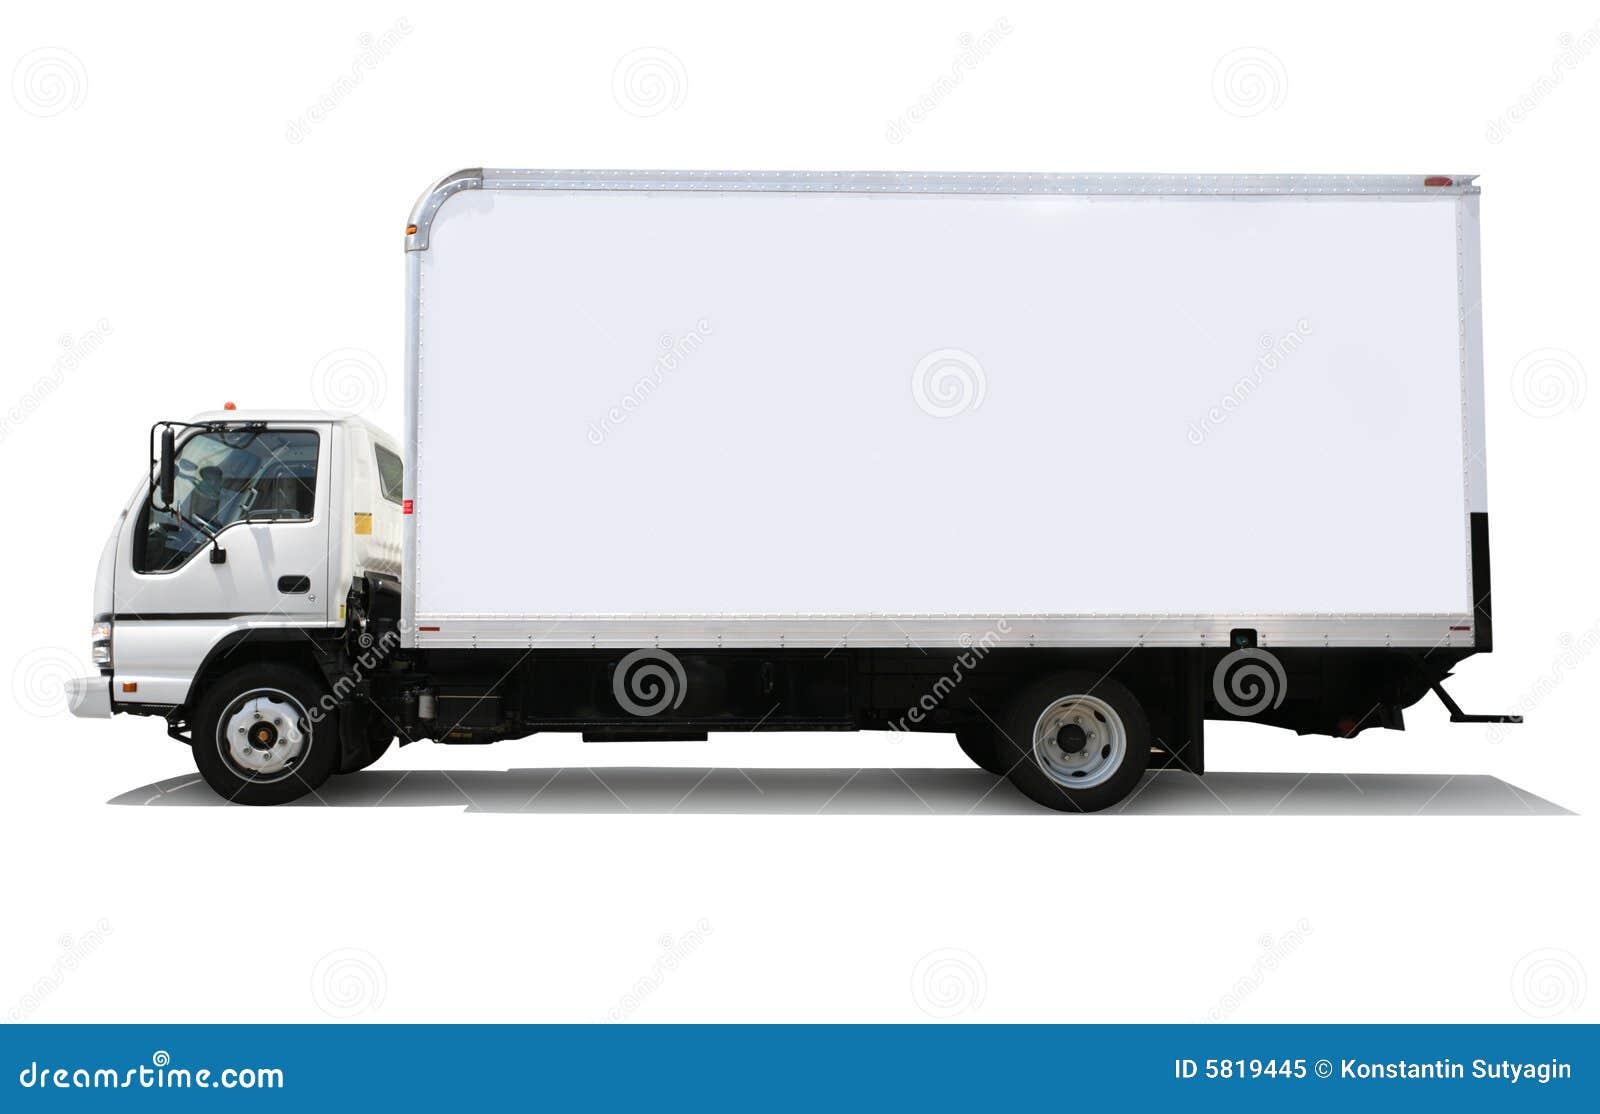 Moving Truck Stock Photos  Download 11,581 Images